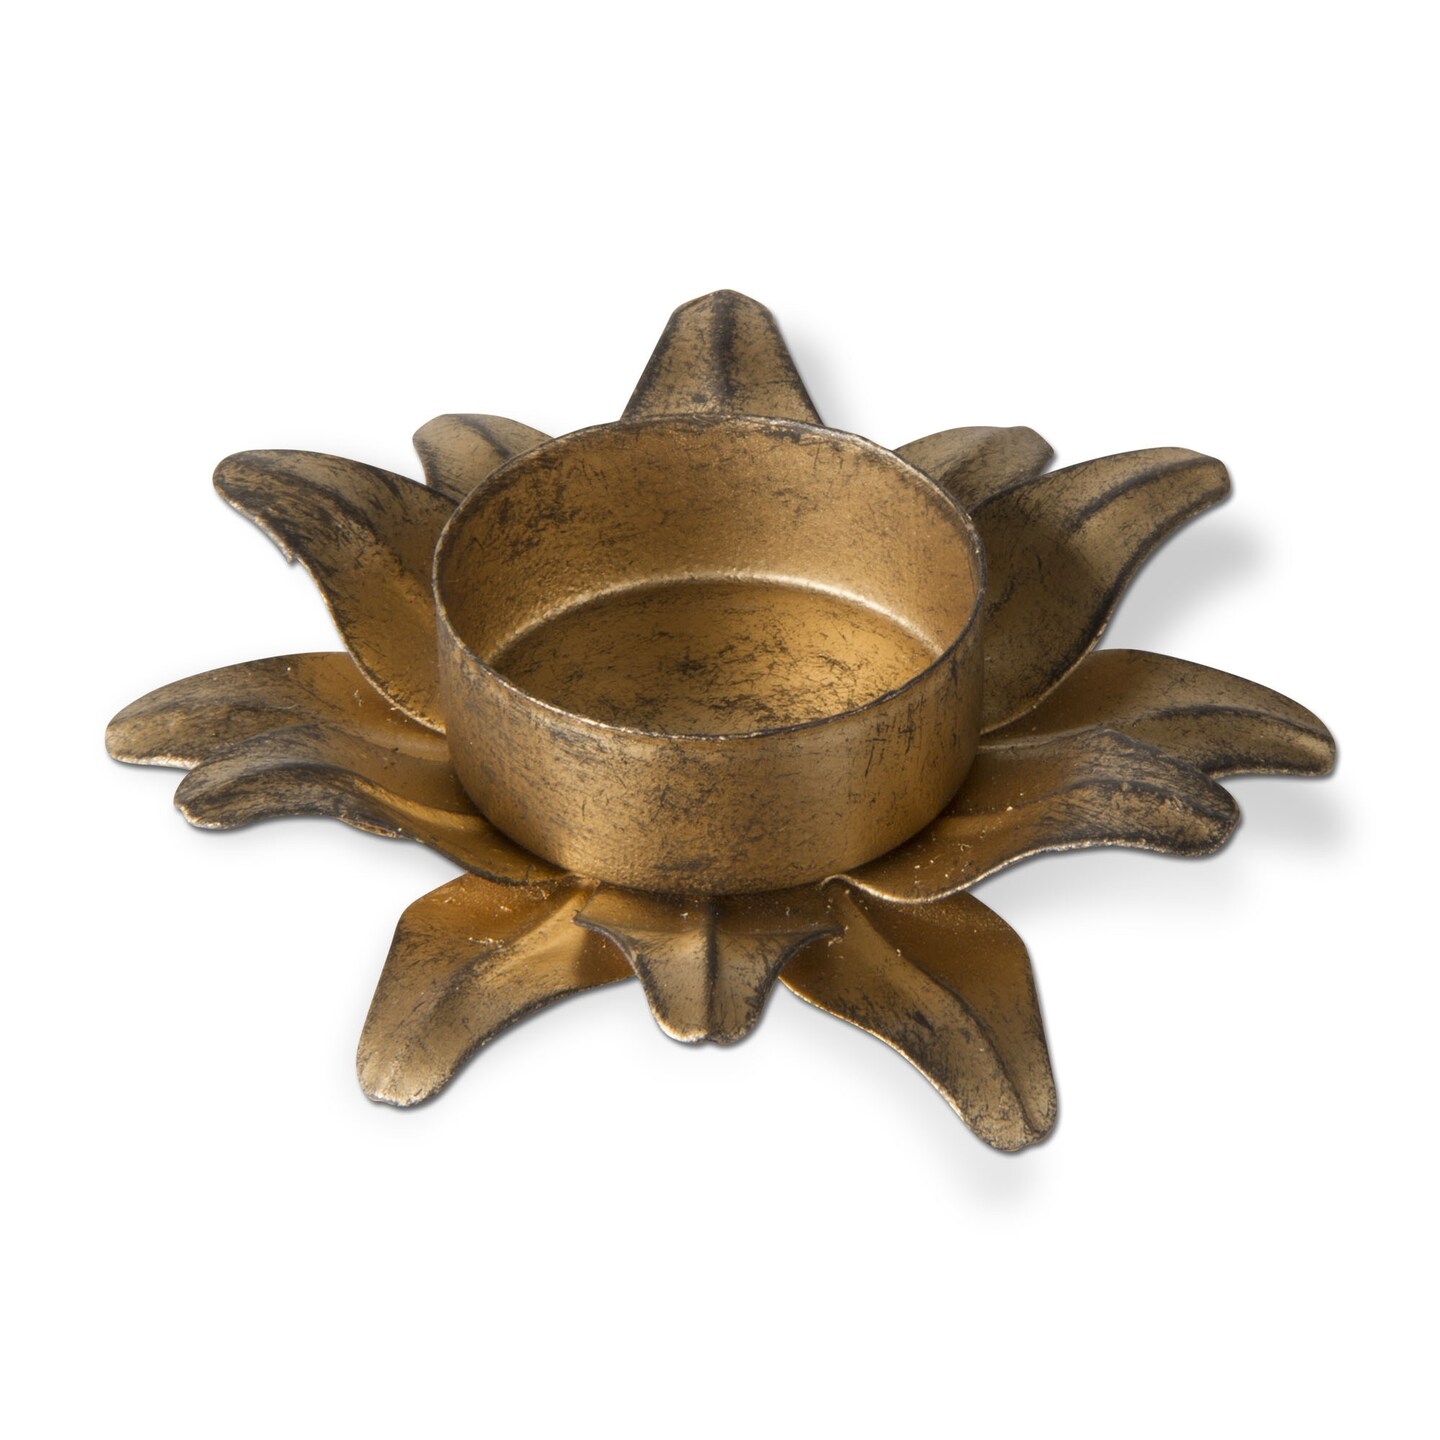 Antique Gold Iron Flower Tealight Holder Small, 3.75L x 3.75W x .75H inches